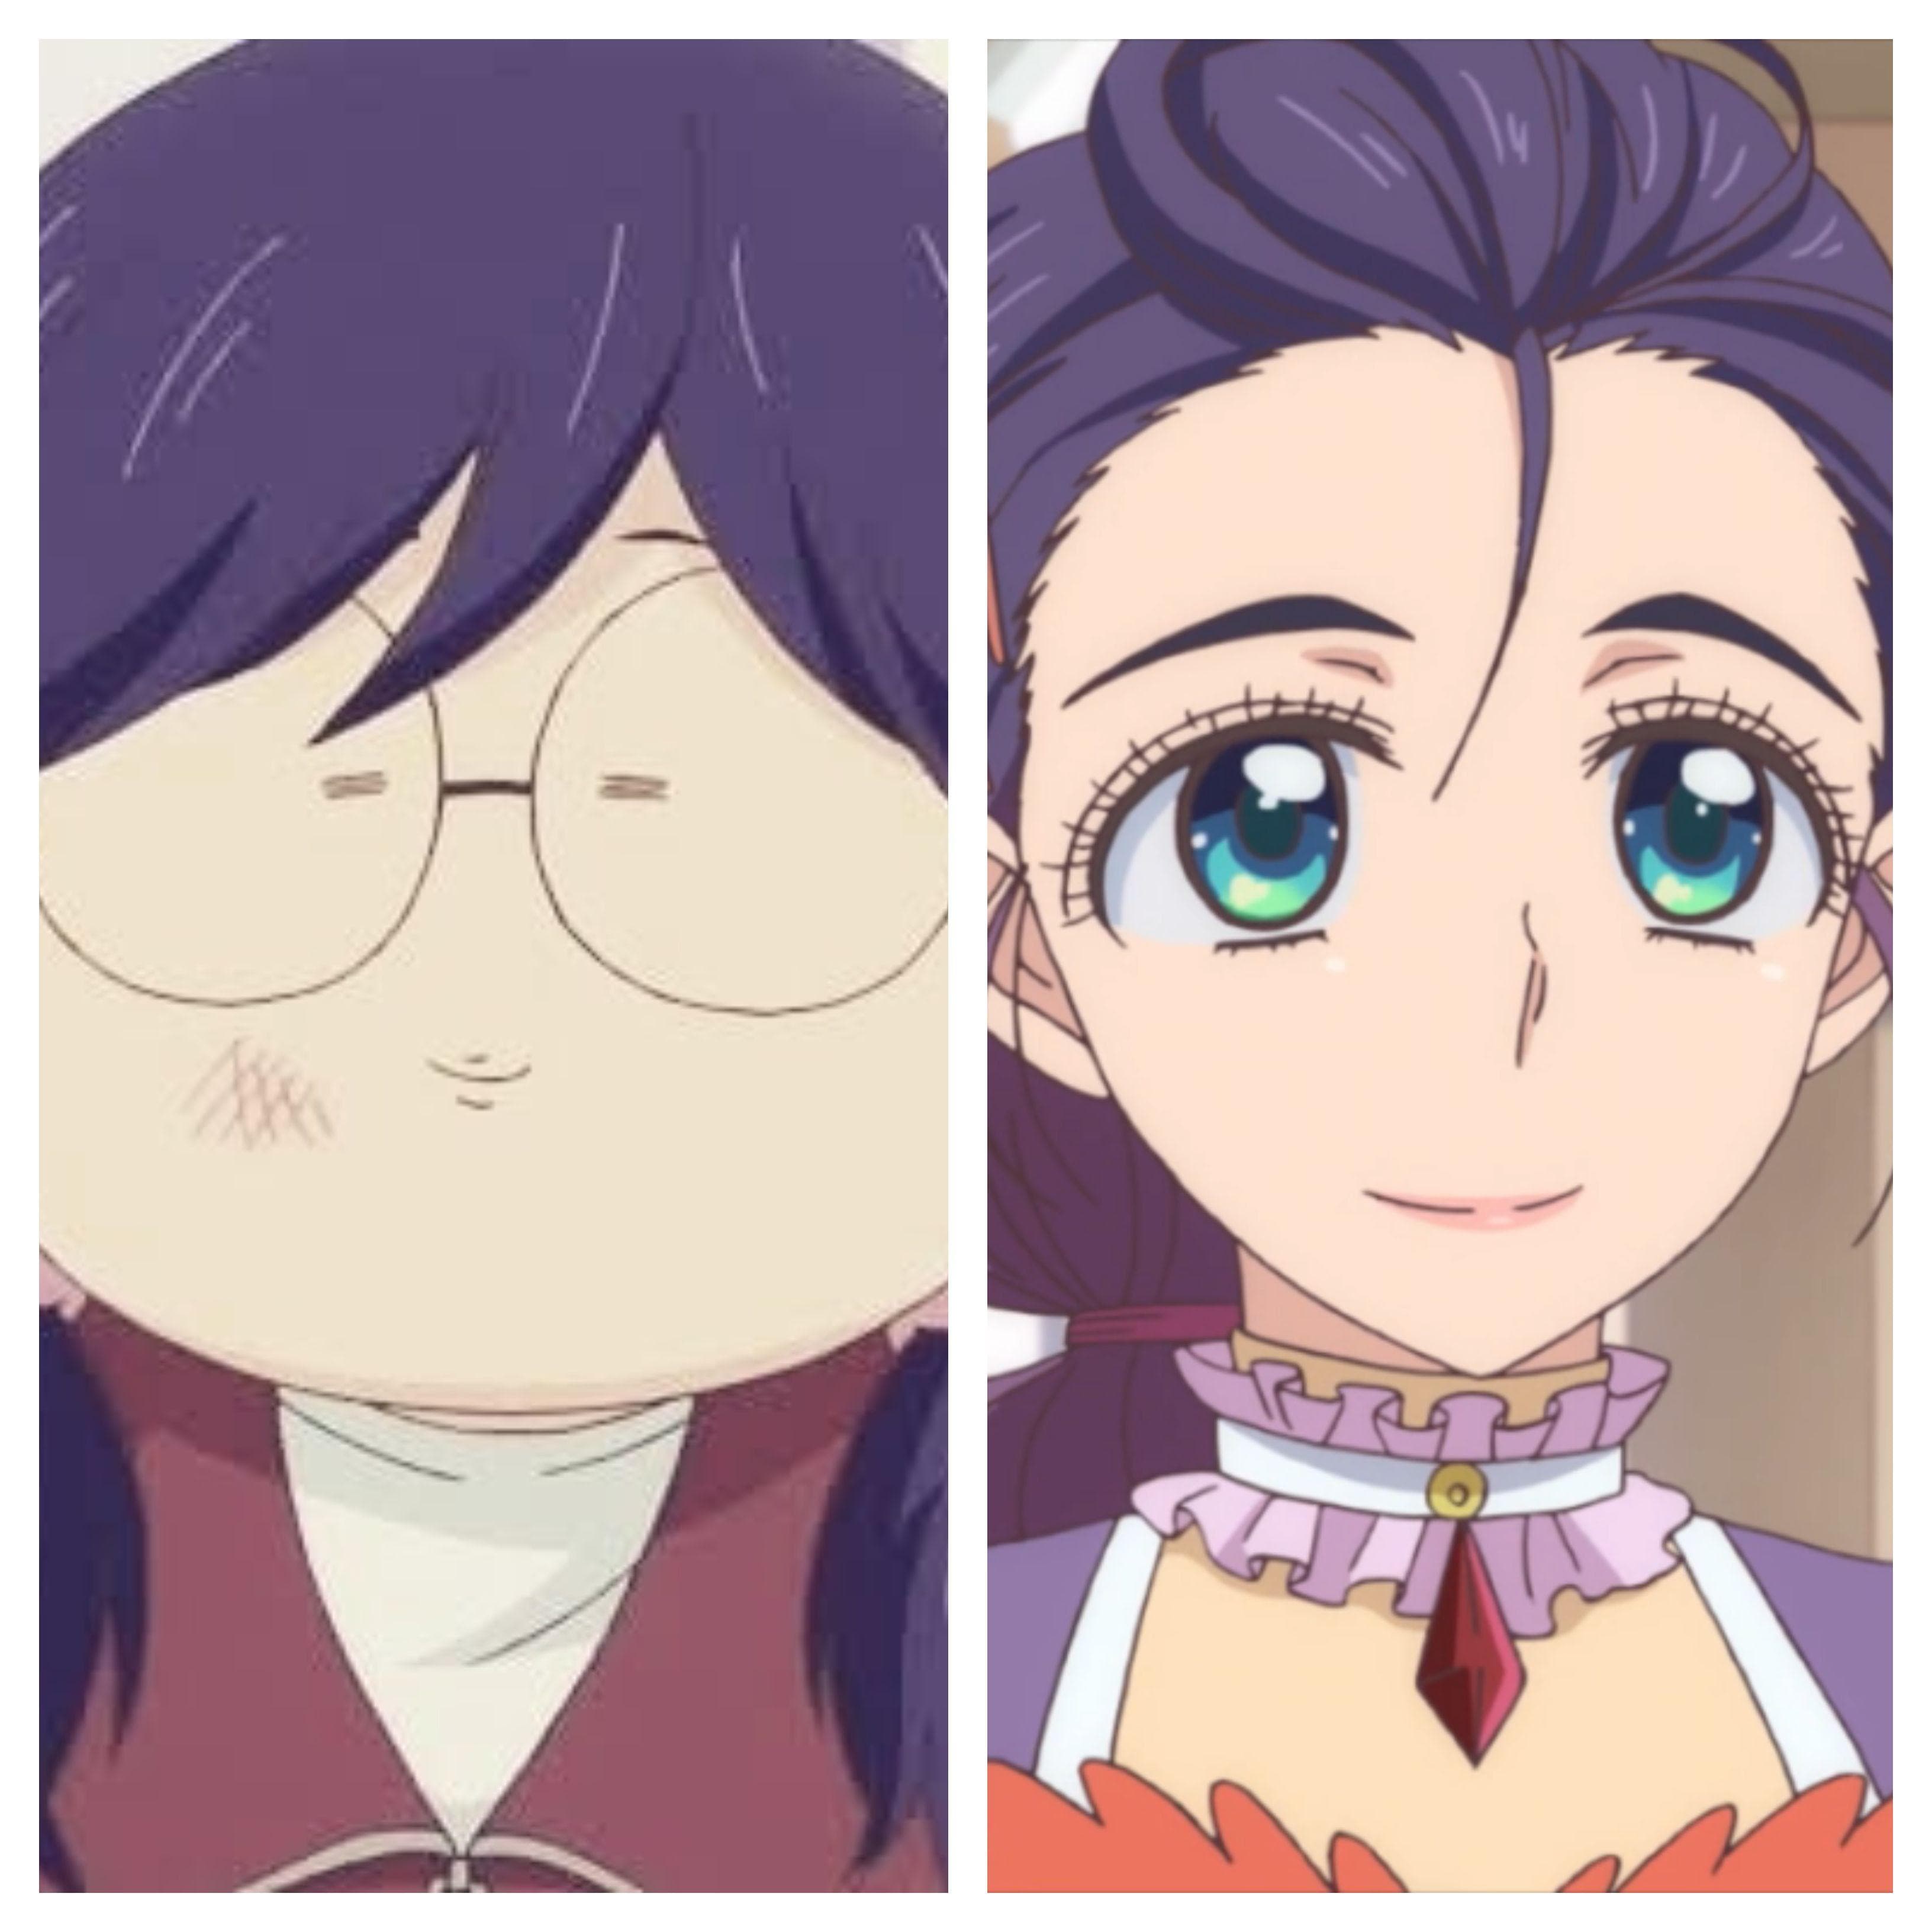 One of the best Glow ups in Anime. Gugu the Gigachad. #toyoureternity